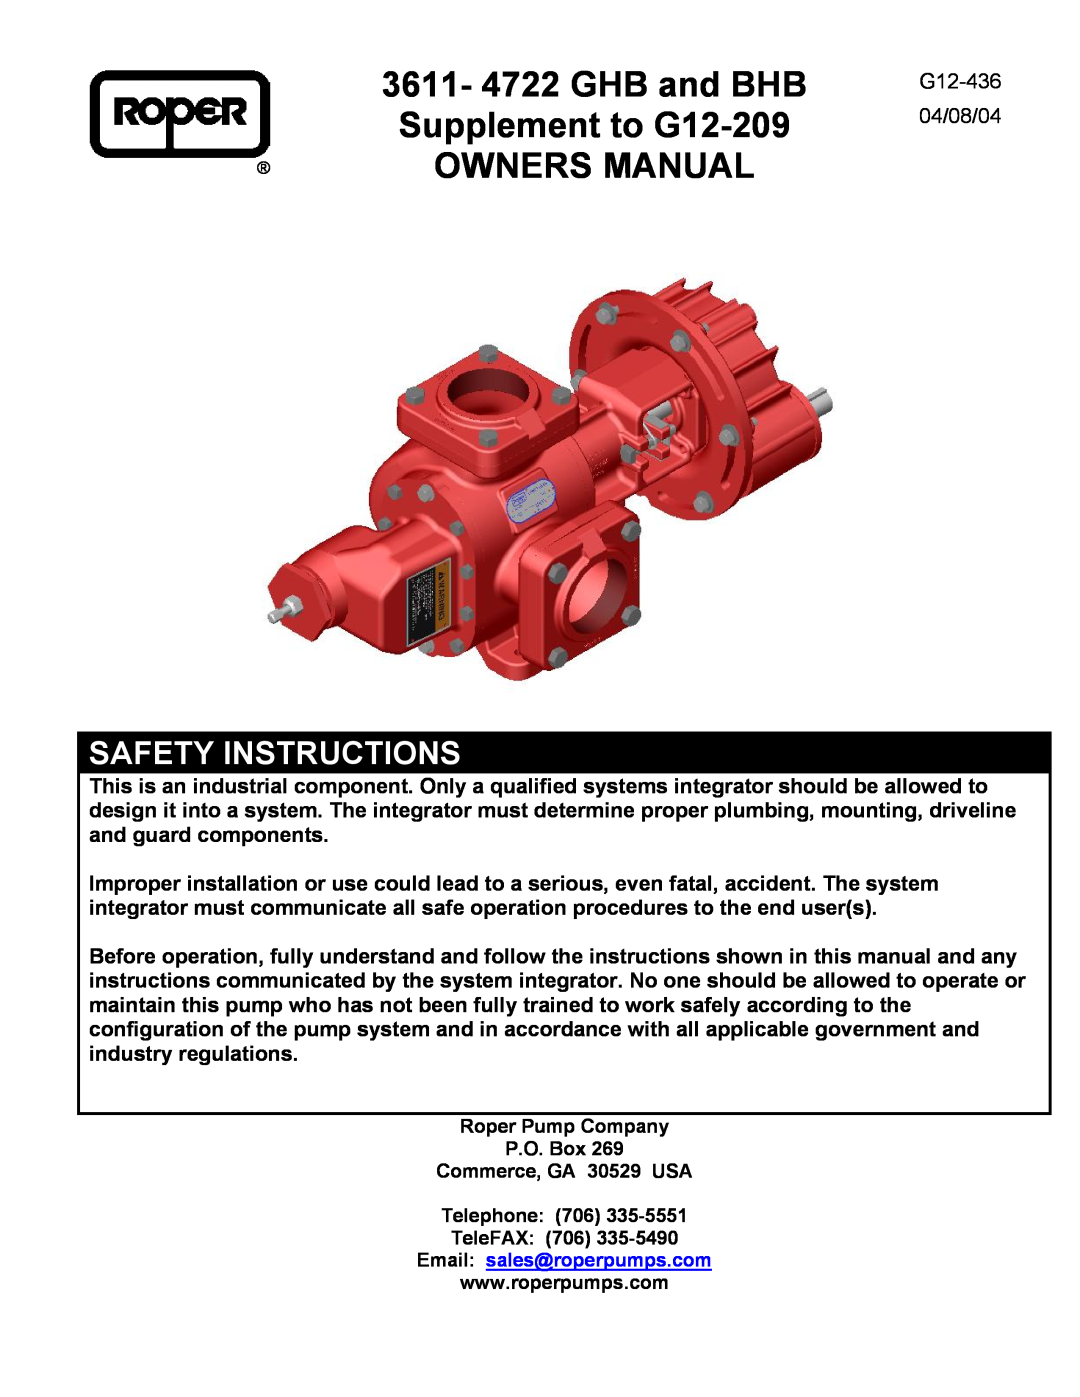 Roper G12-436 owner manual 3611- 4722 GHB and BHB, Supplement to G12-209, Safety Instructions 